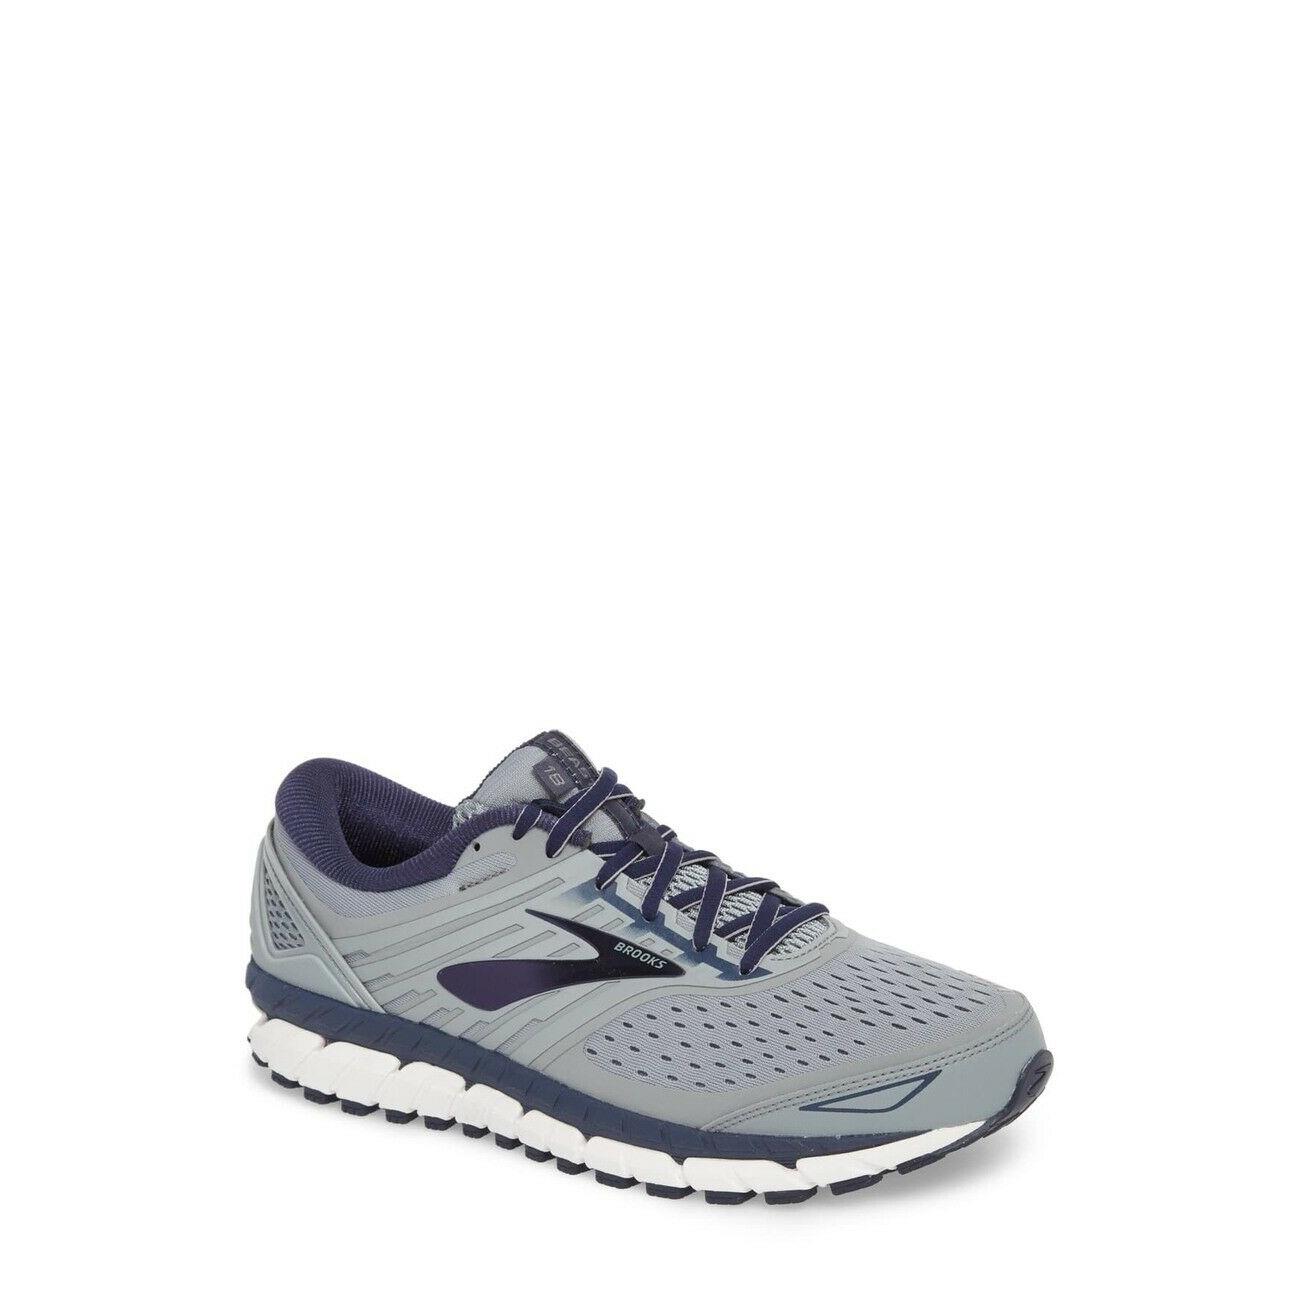 Brooks Mens Beast 18 1102821D015 Grey/navy/white Running Shoes Lace Up Size 11 D